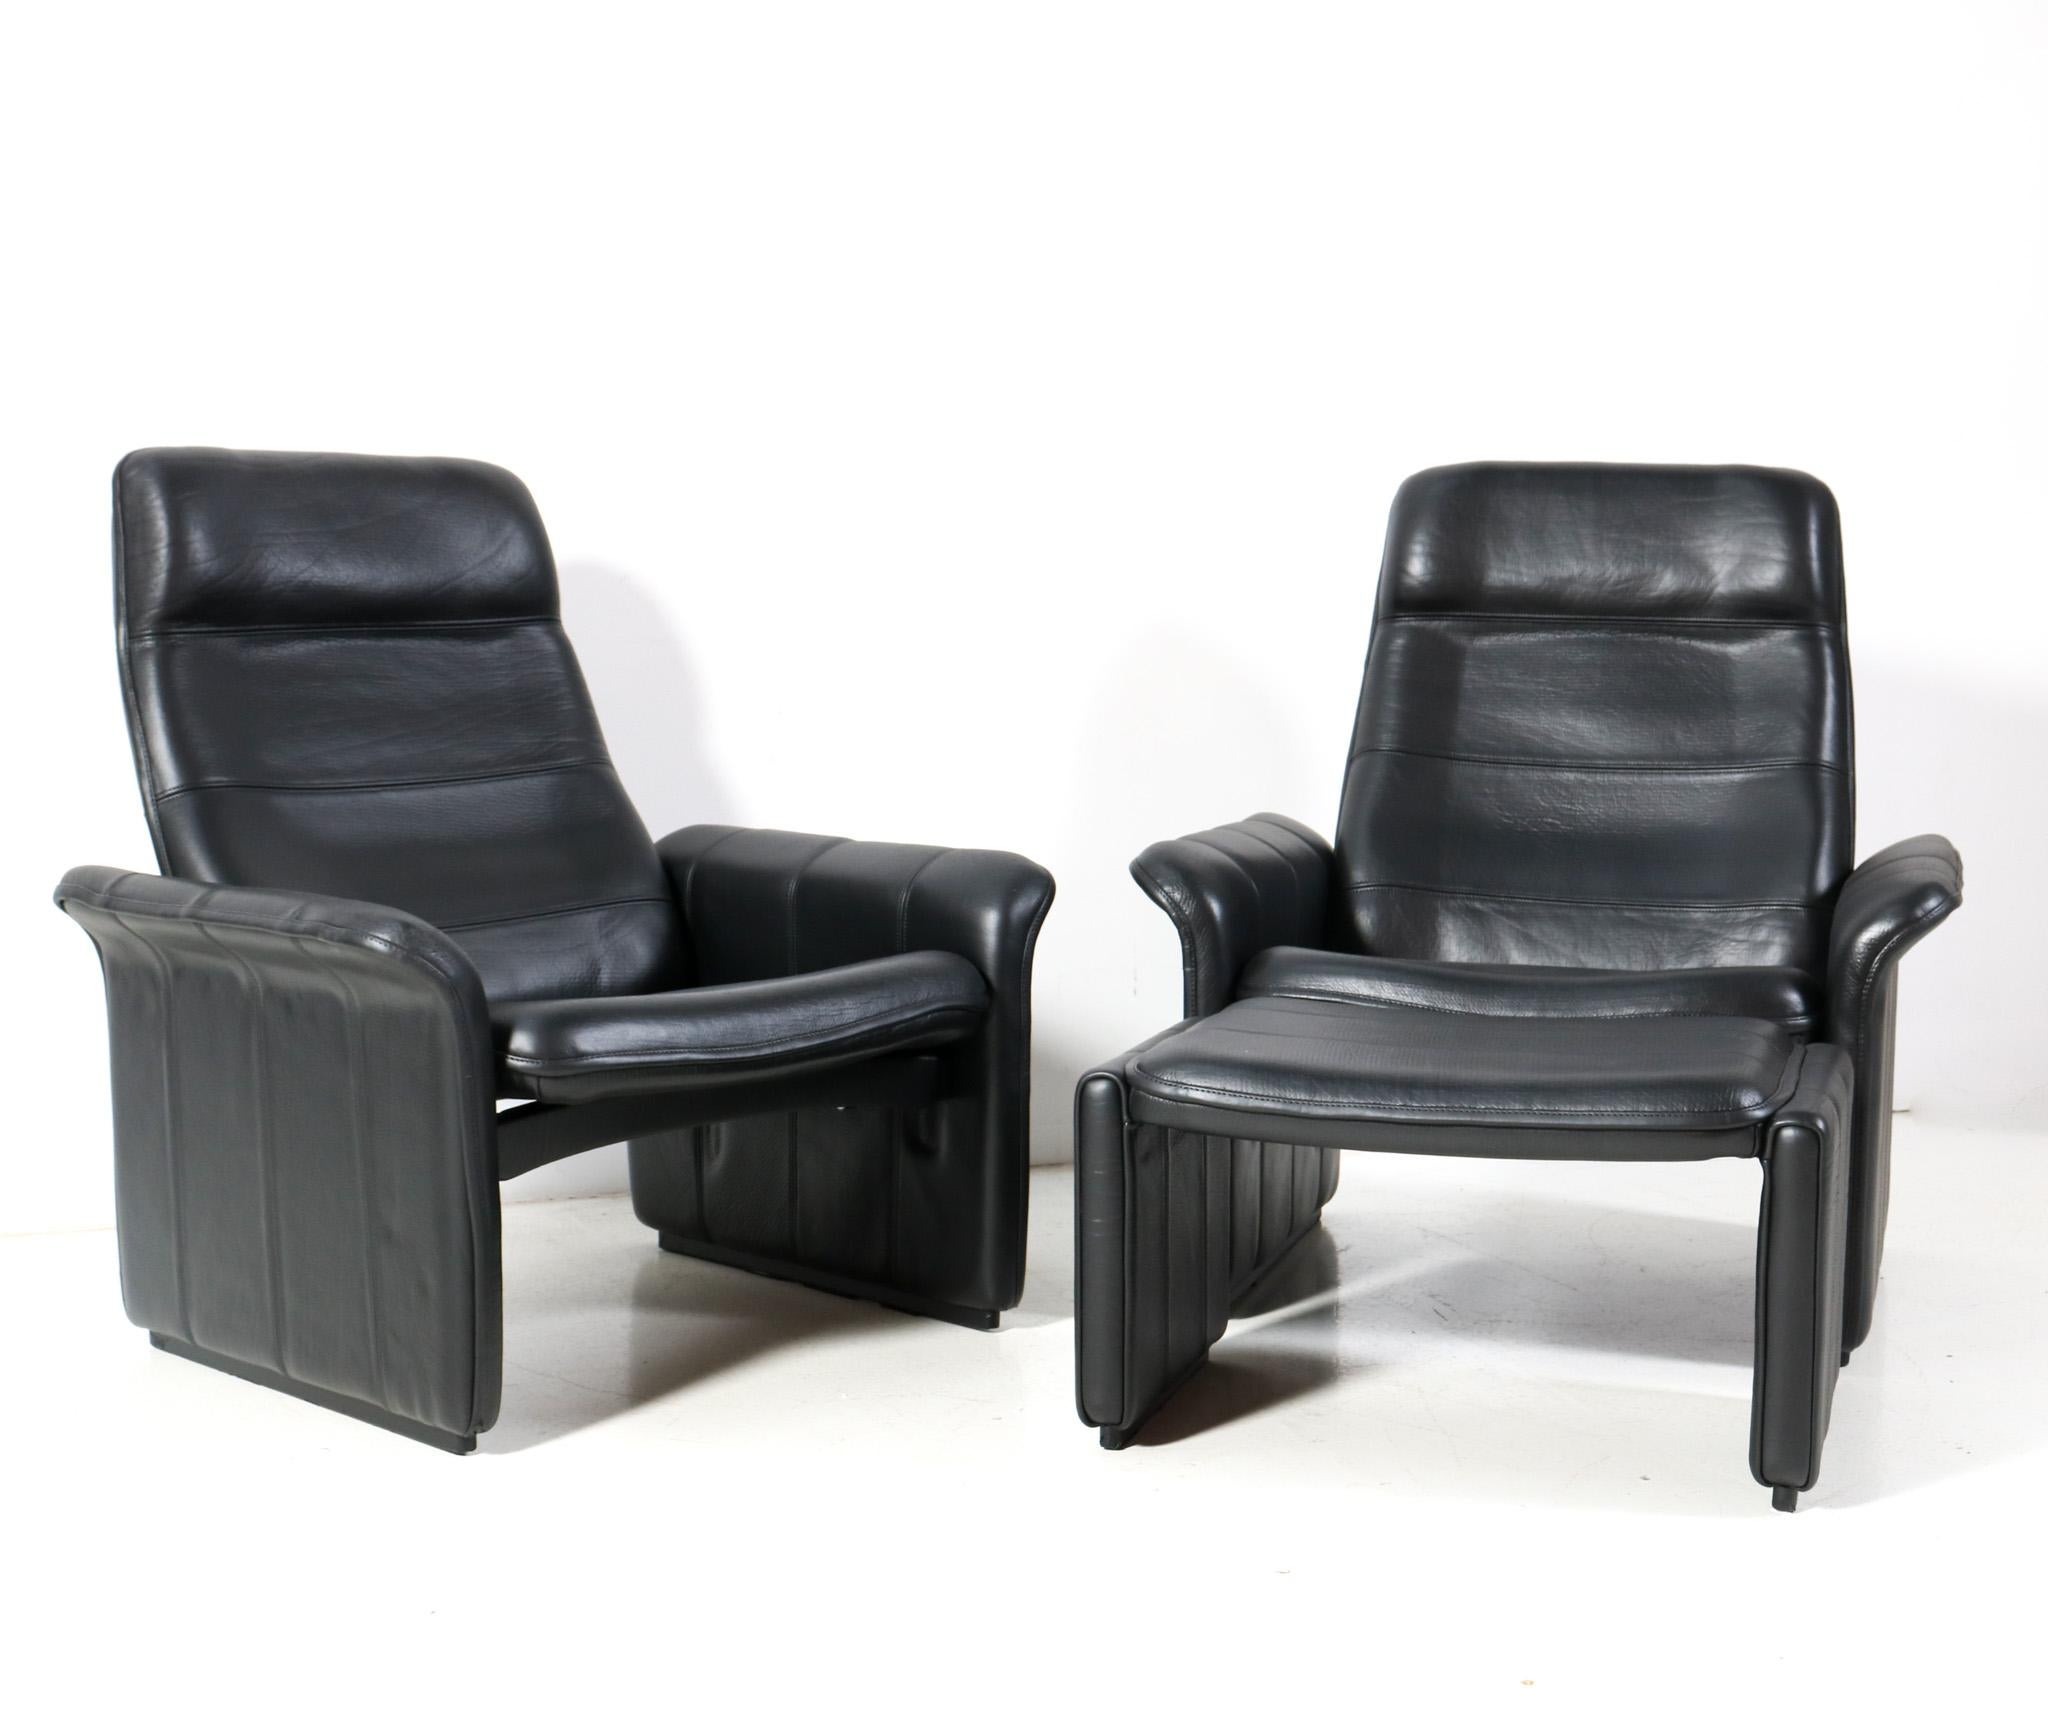 Stunning and elegant pair of Mid-Century Modern DS-50 recliner lounge chairs with one ottoman or hocker.
Design by the famous company De Sede Switzerland.
Striking Swiss design from the 1970s.
Original solid wooden frames with hand stitched black